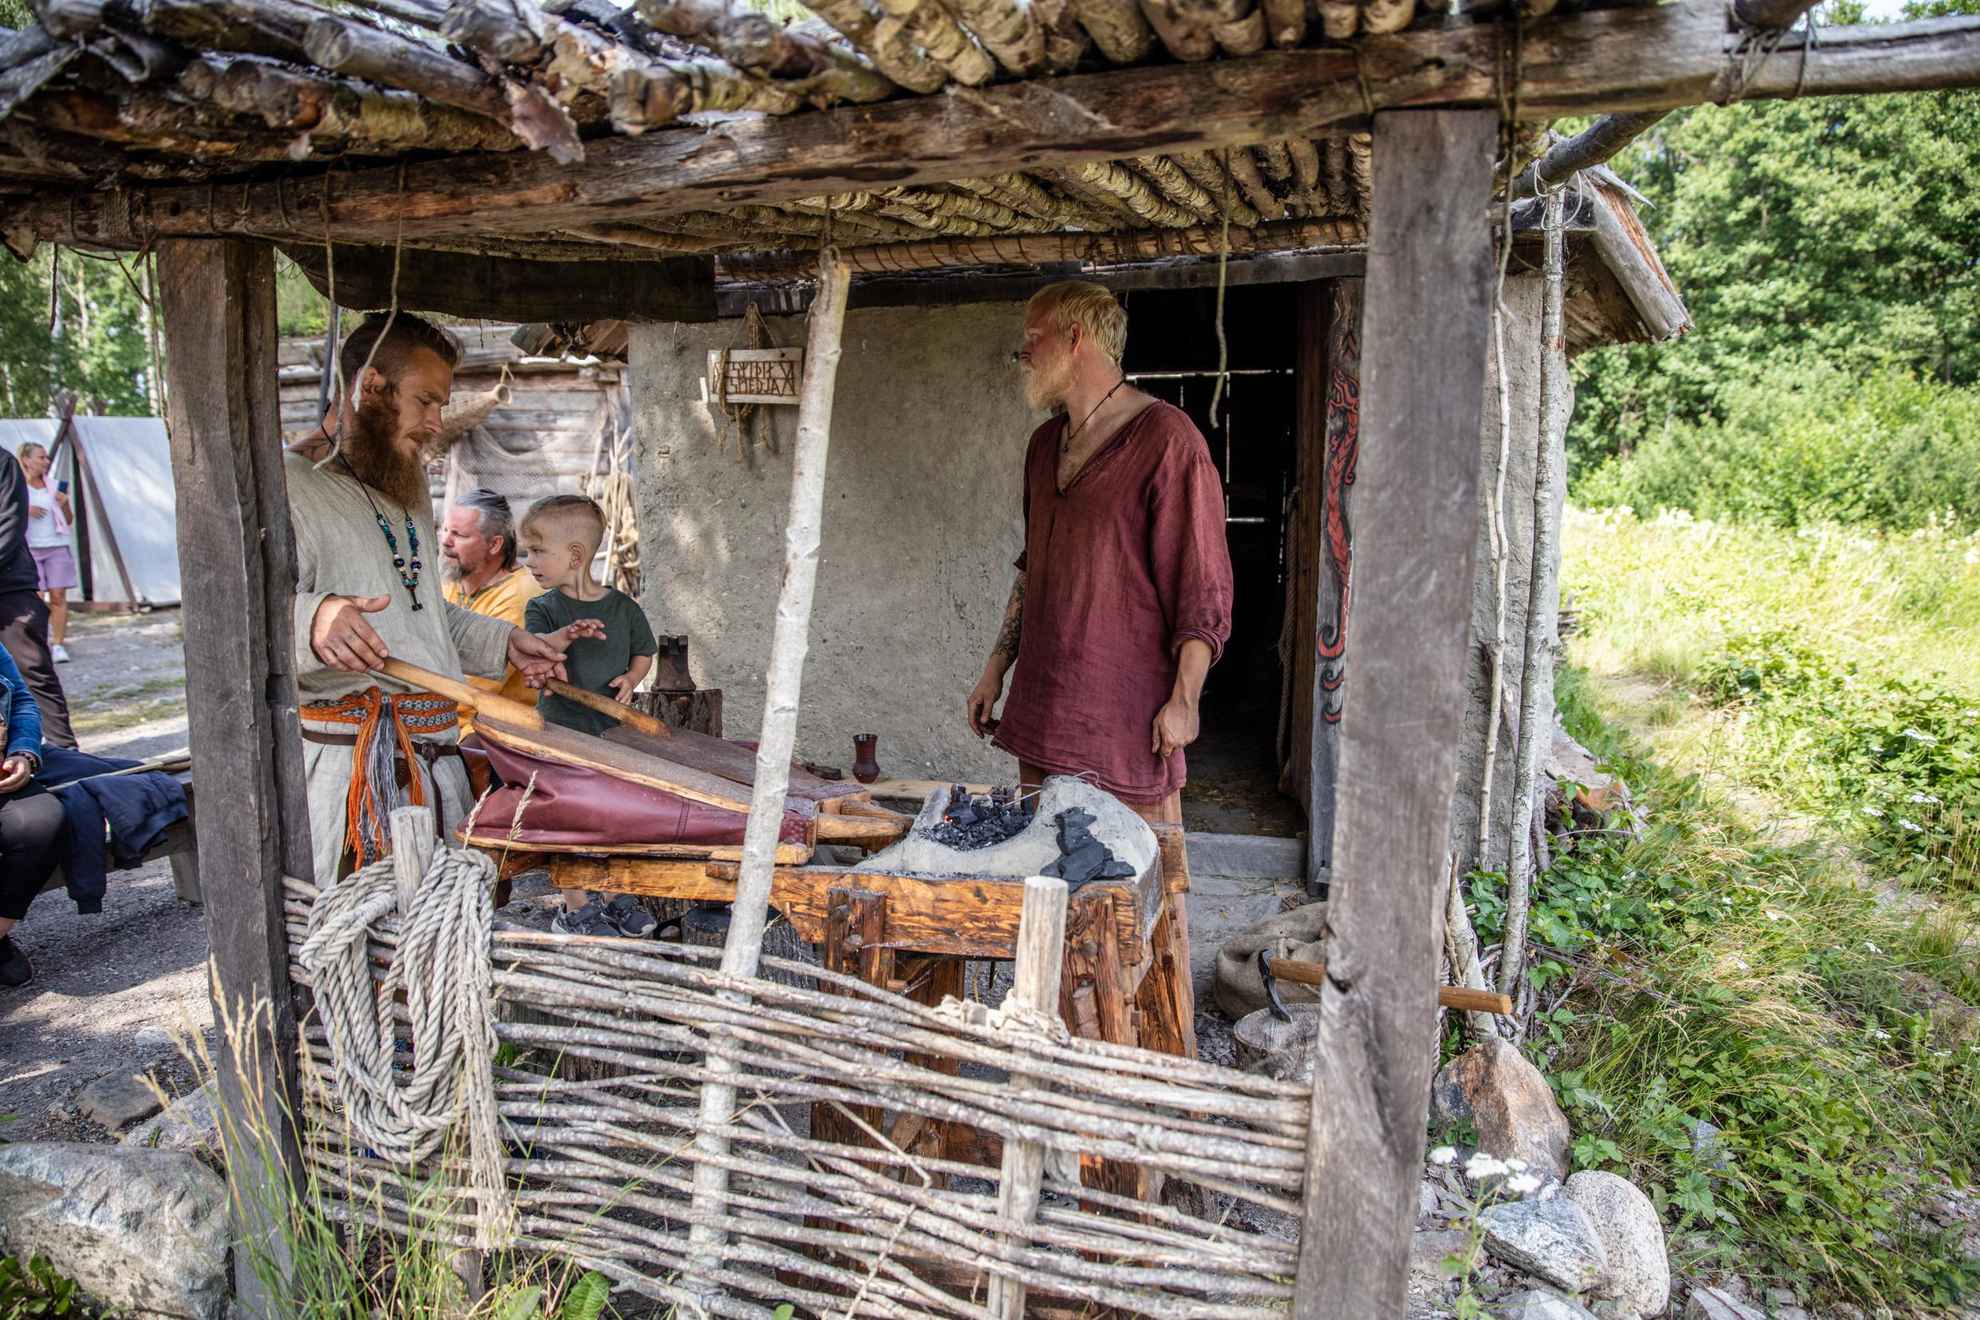 Two kids watch as two men, dressed in historically typical viking clothing, work by a hearth.